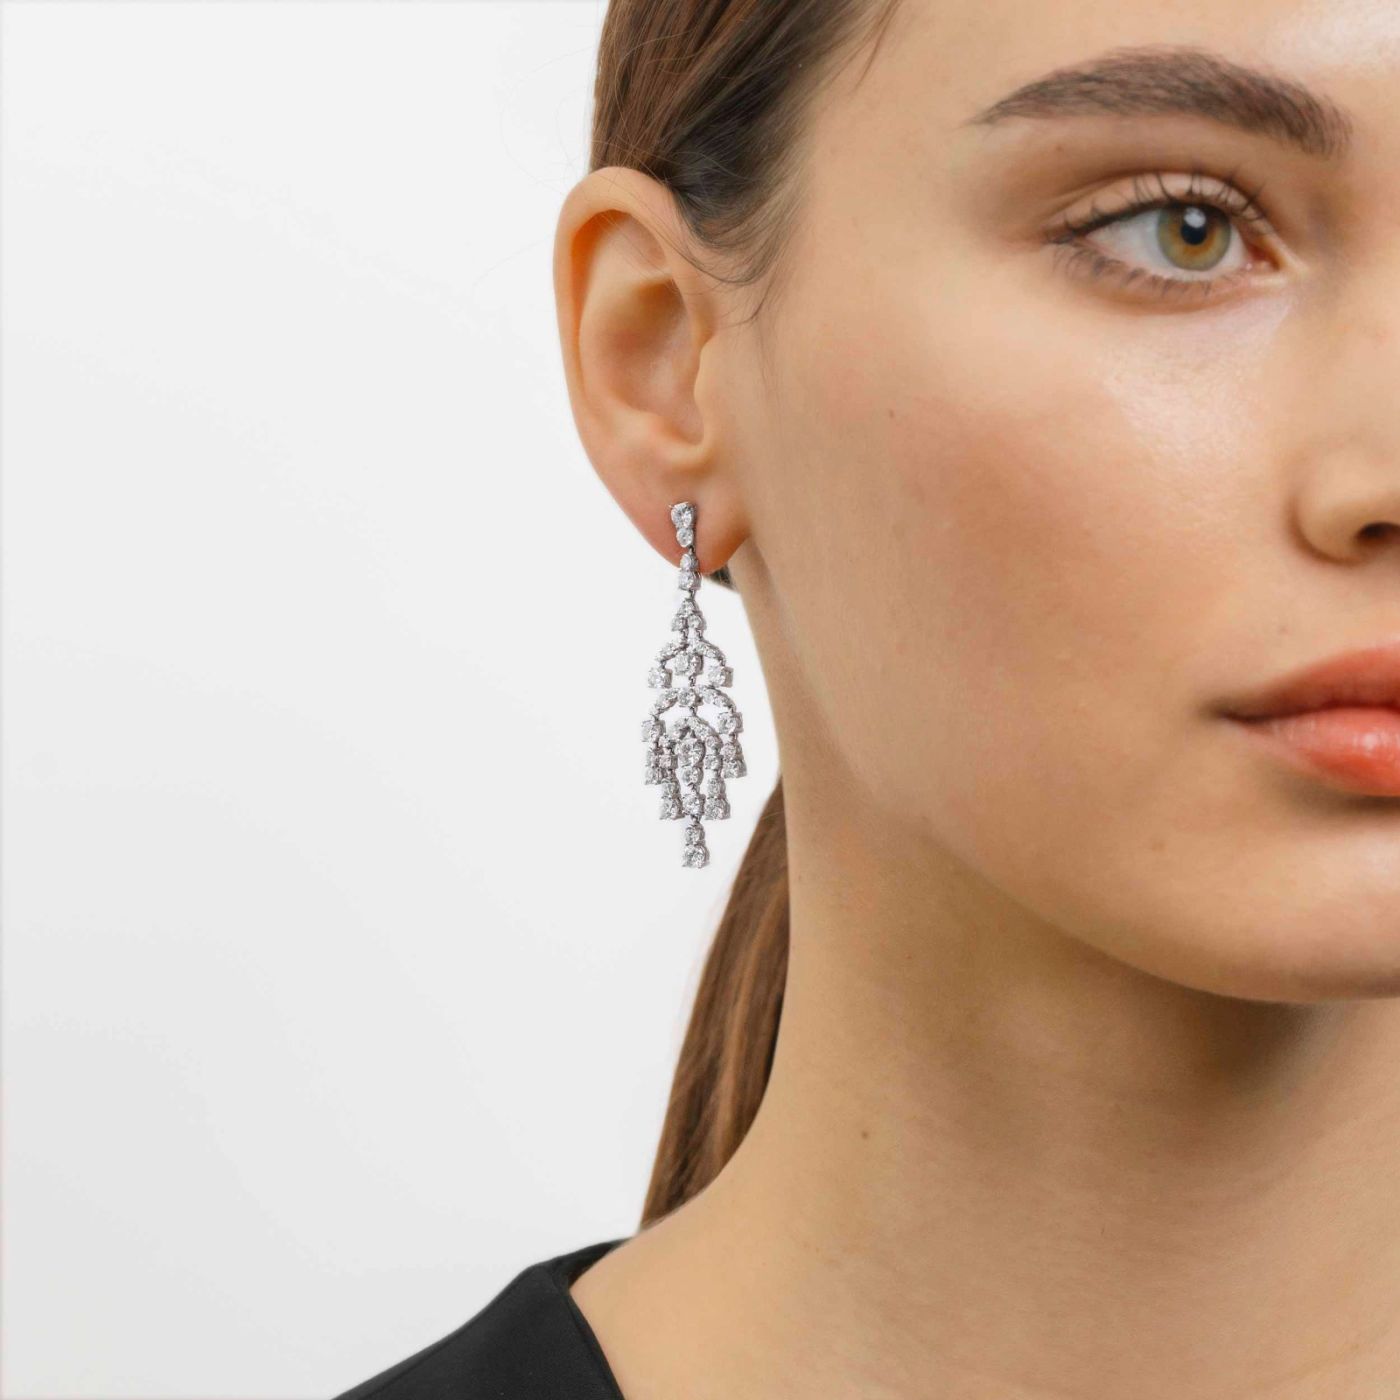 Long earrings in white gold waterfall with diamonds